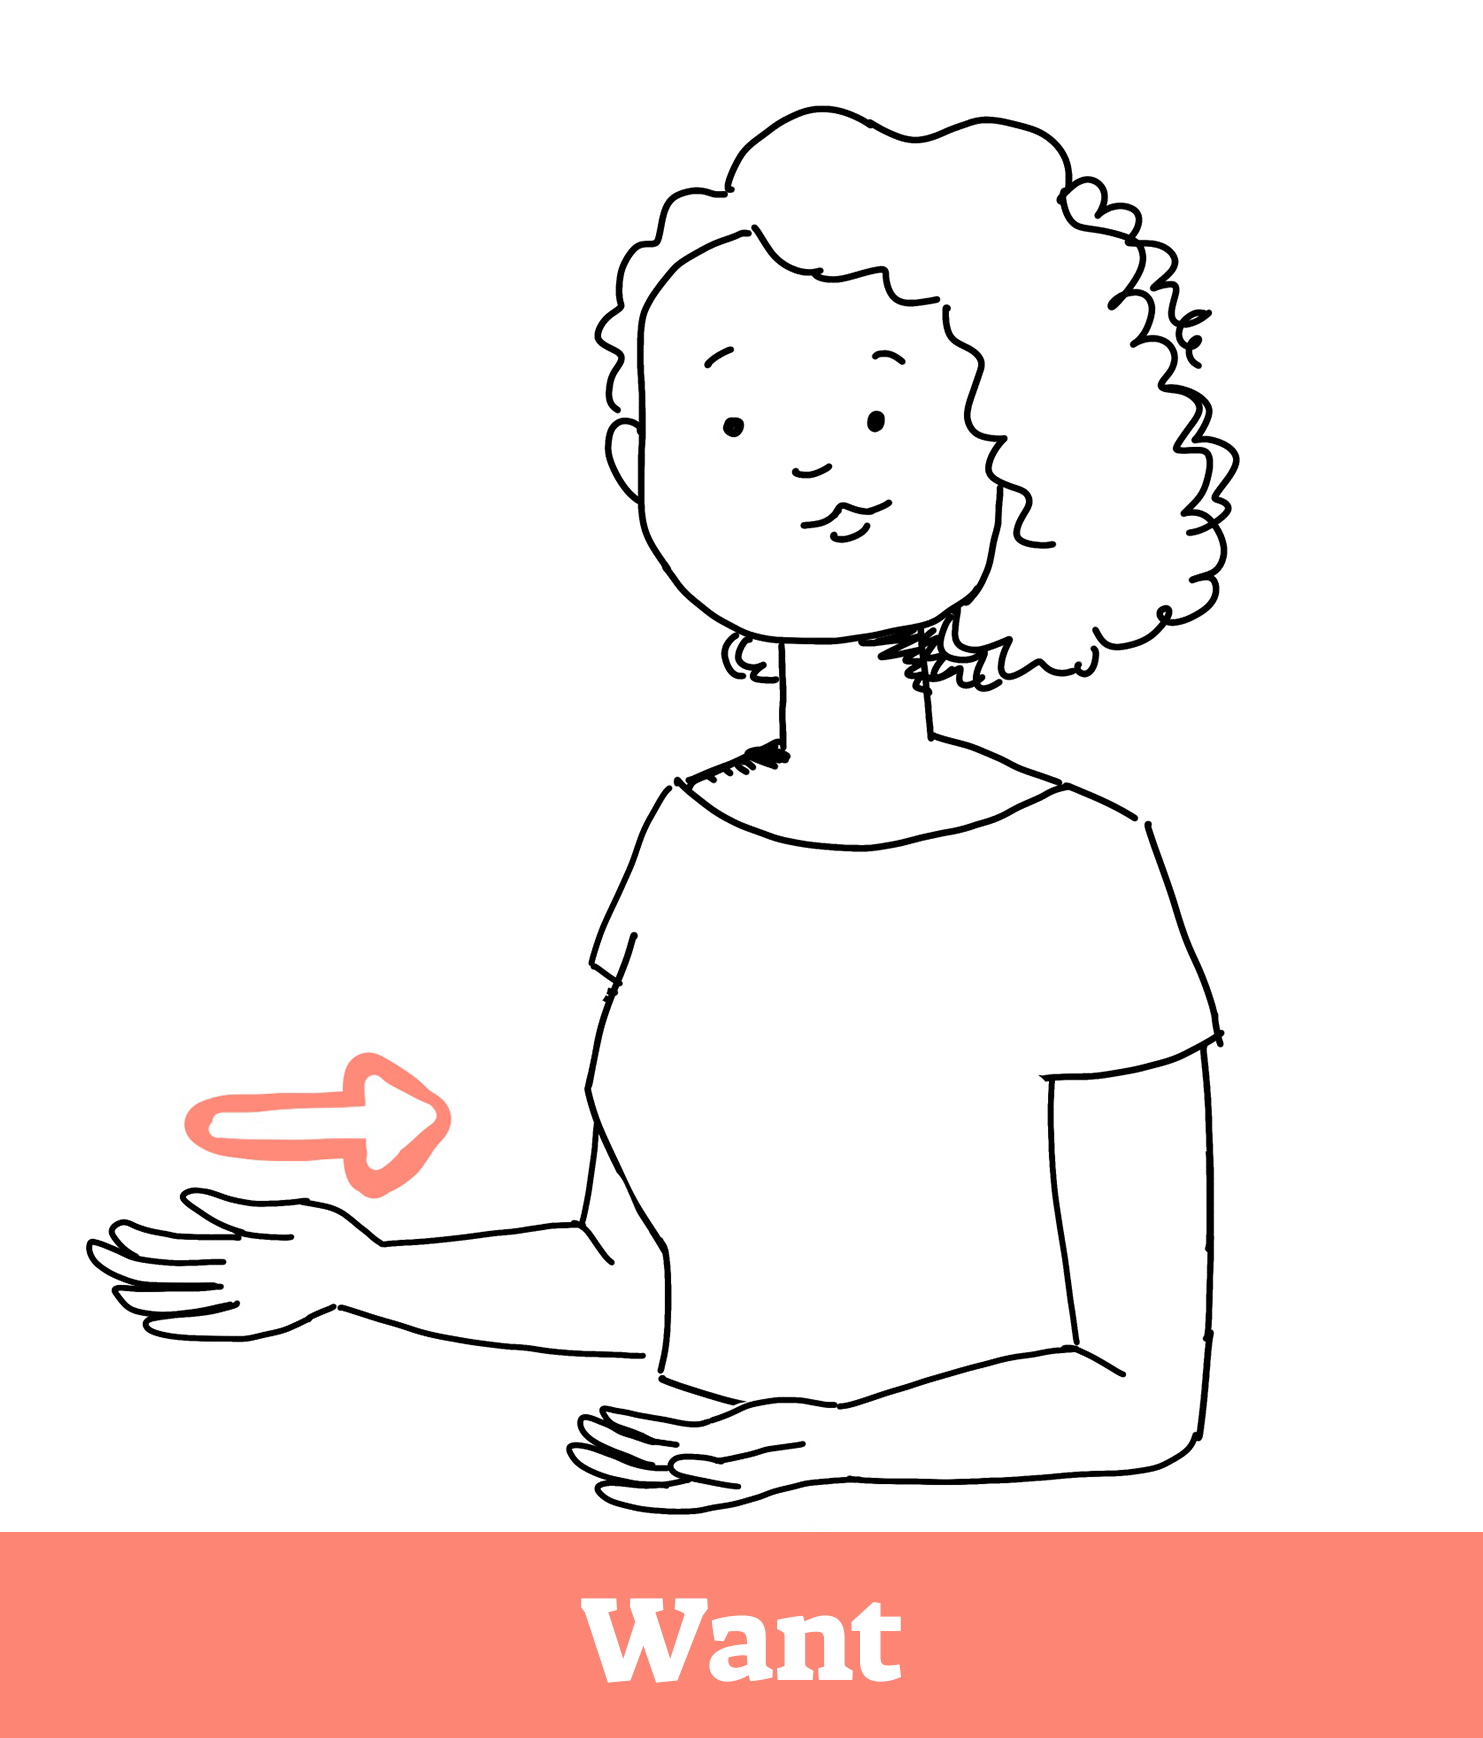 Animated person doing the baby sign language sign for the word "want".